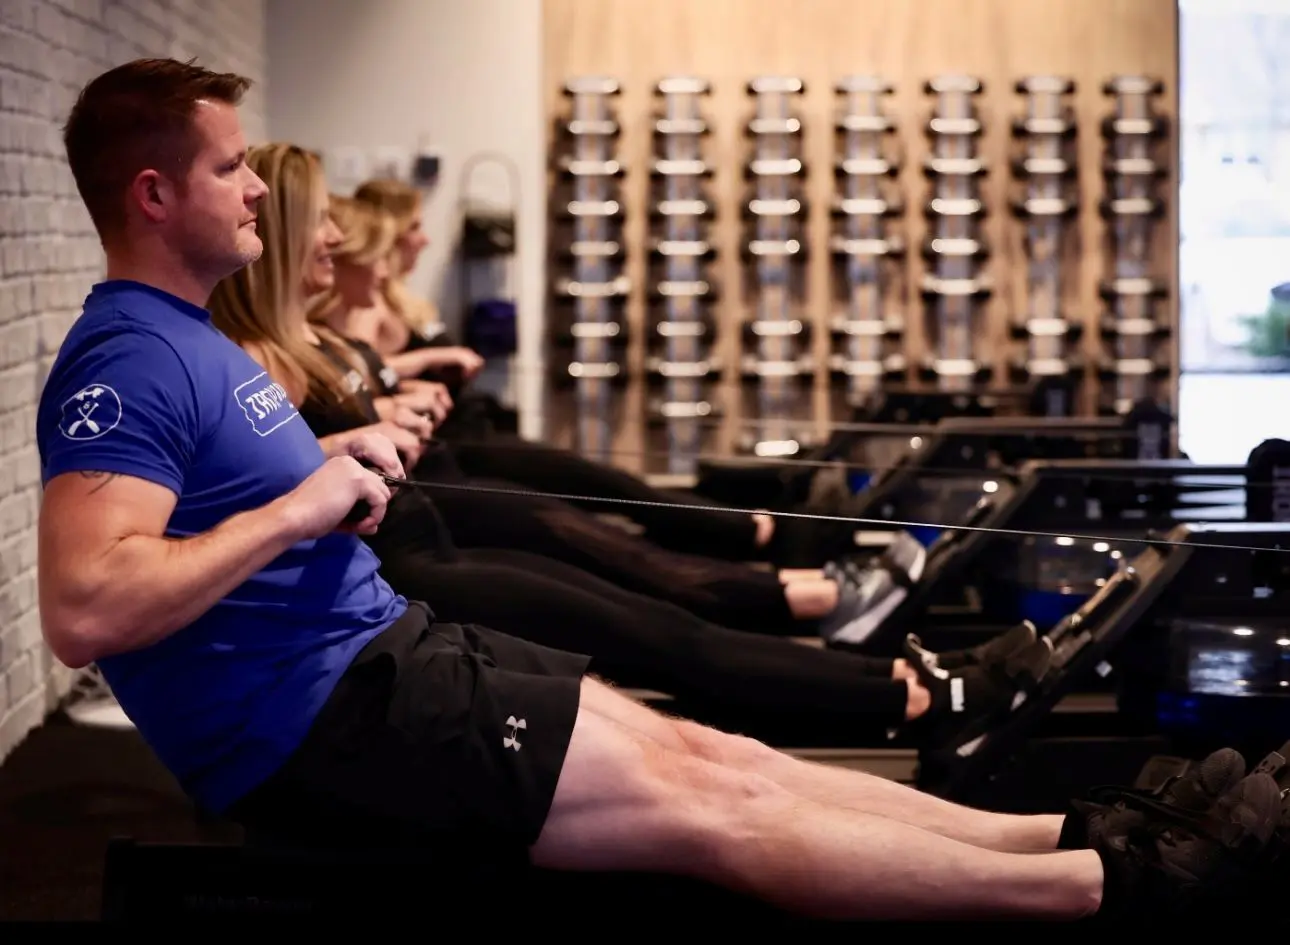 A man and woman are sitting on rowing machines.